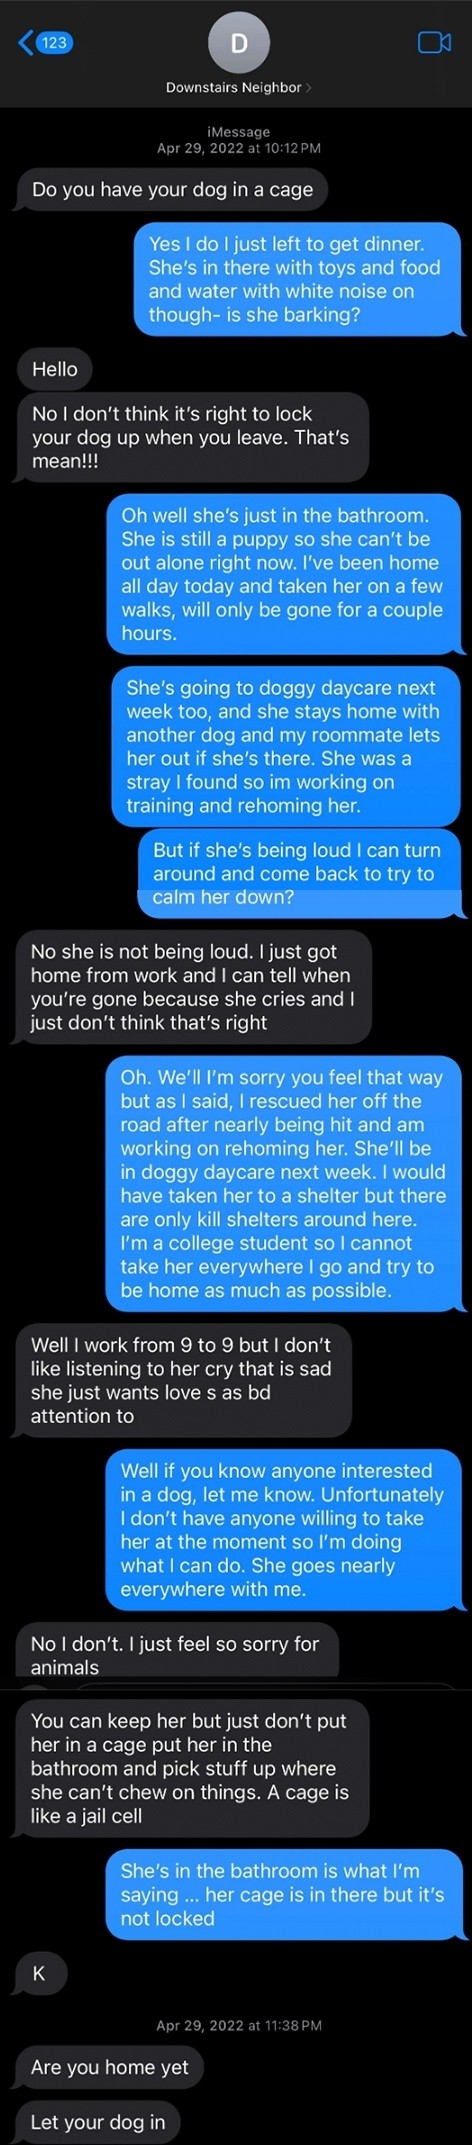 screenshot of a text exchange about a neighbor being annoyed someone has their dog in a crate even though the dog is quiet